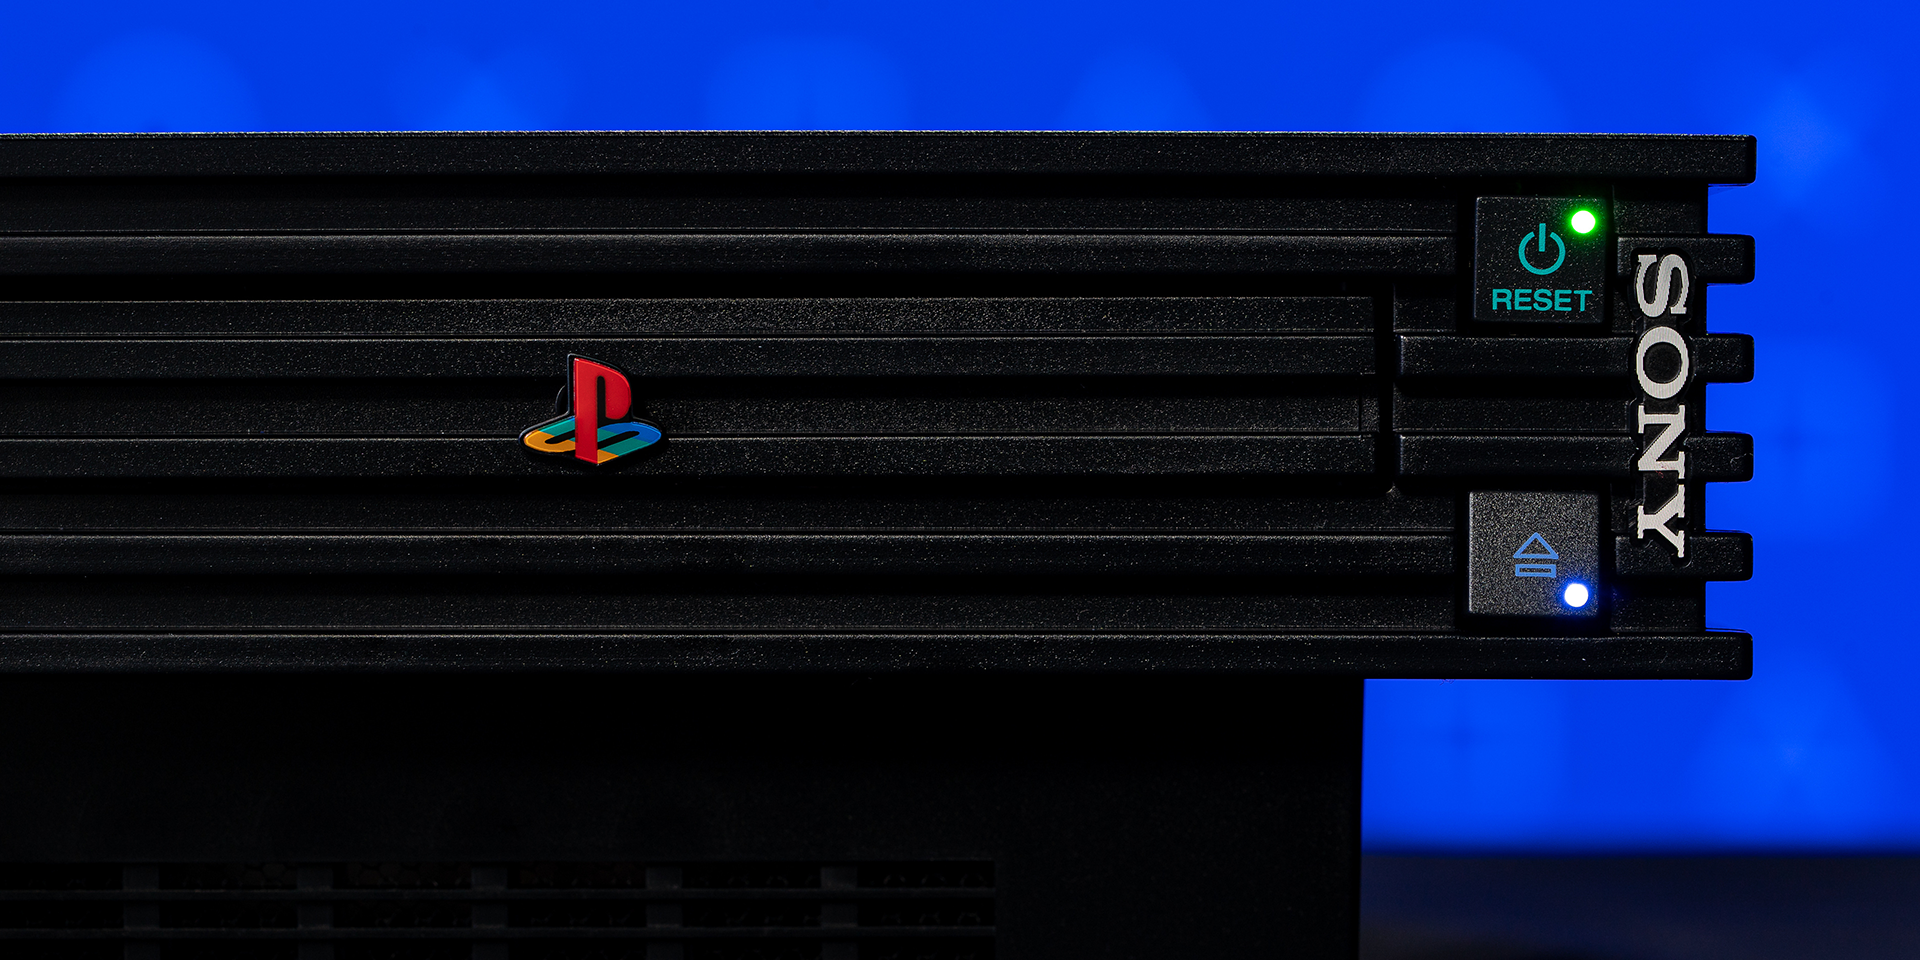 A picture of the PS2 console 